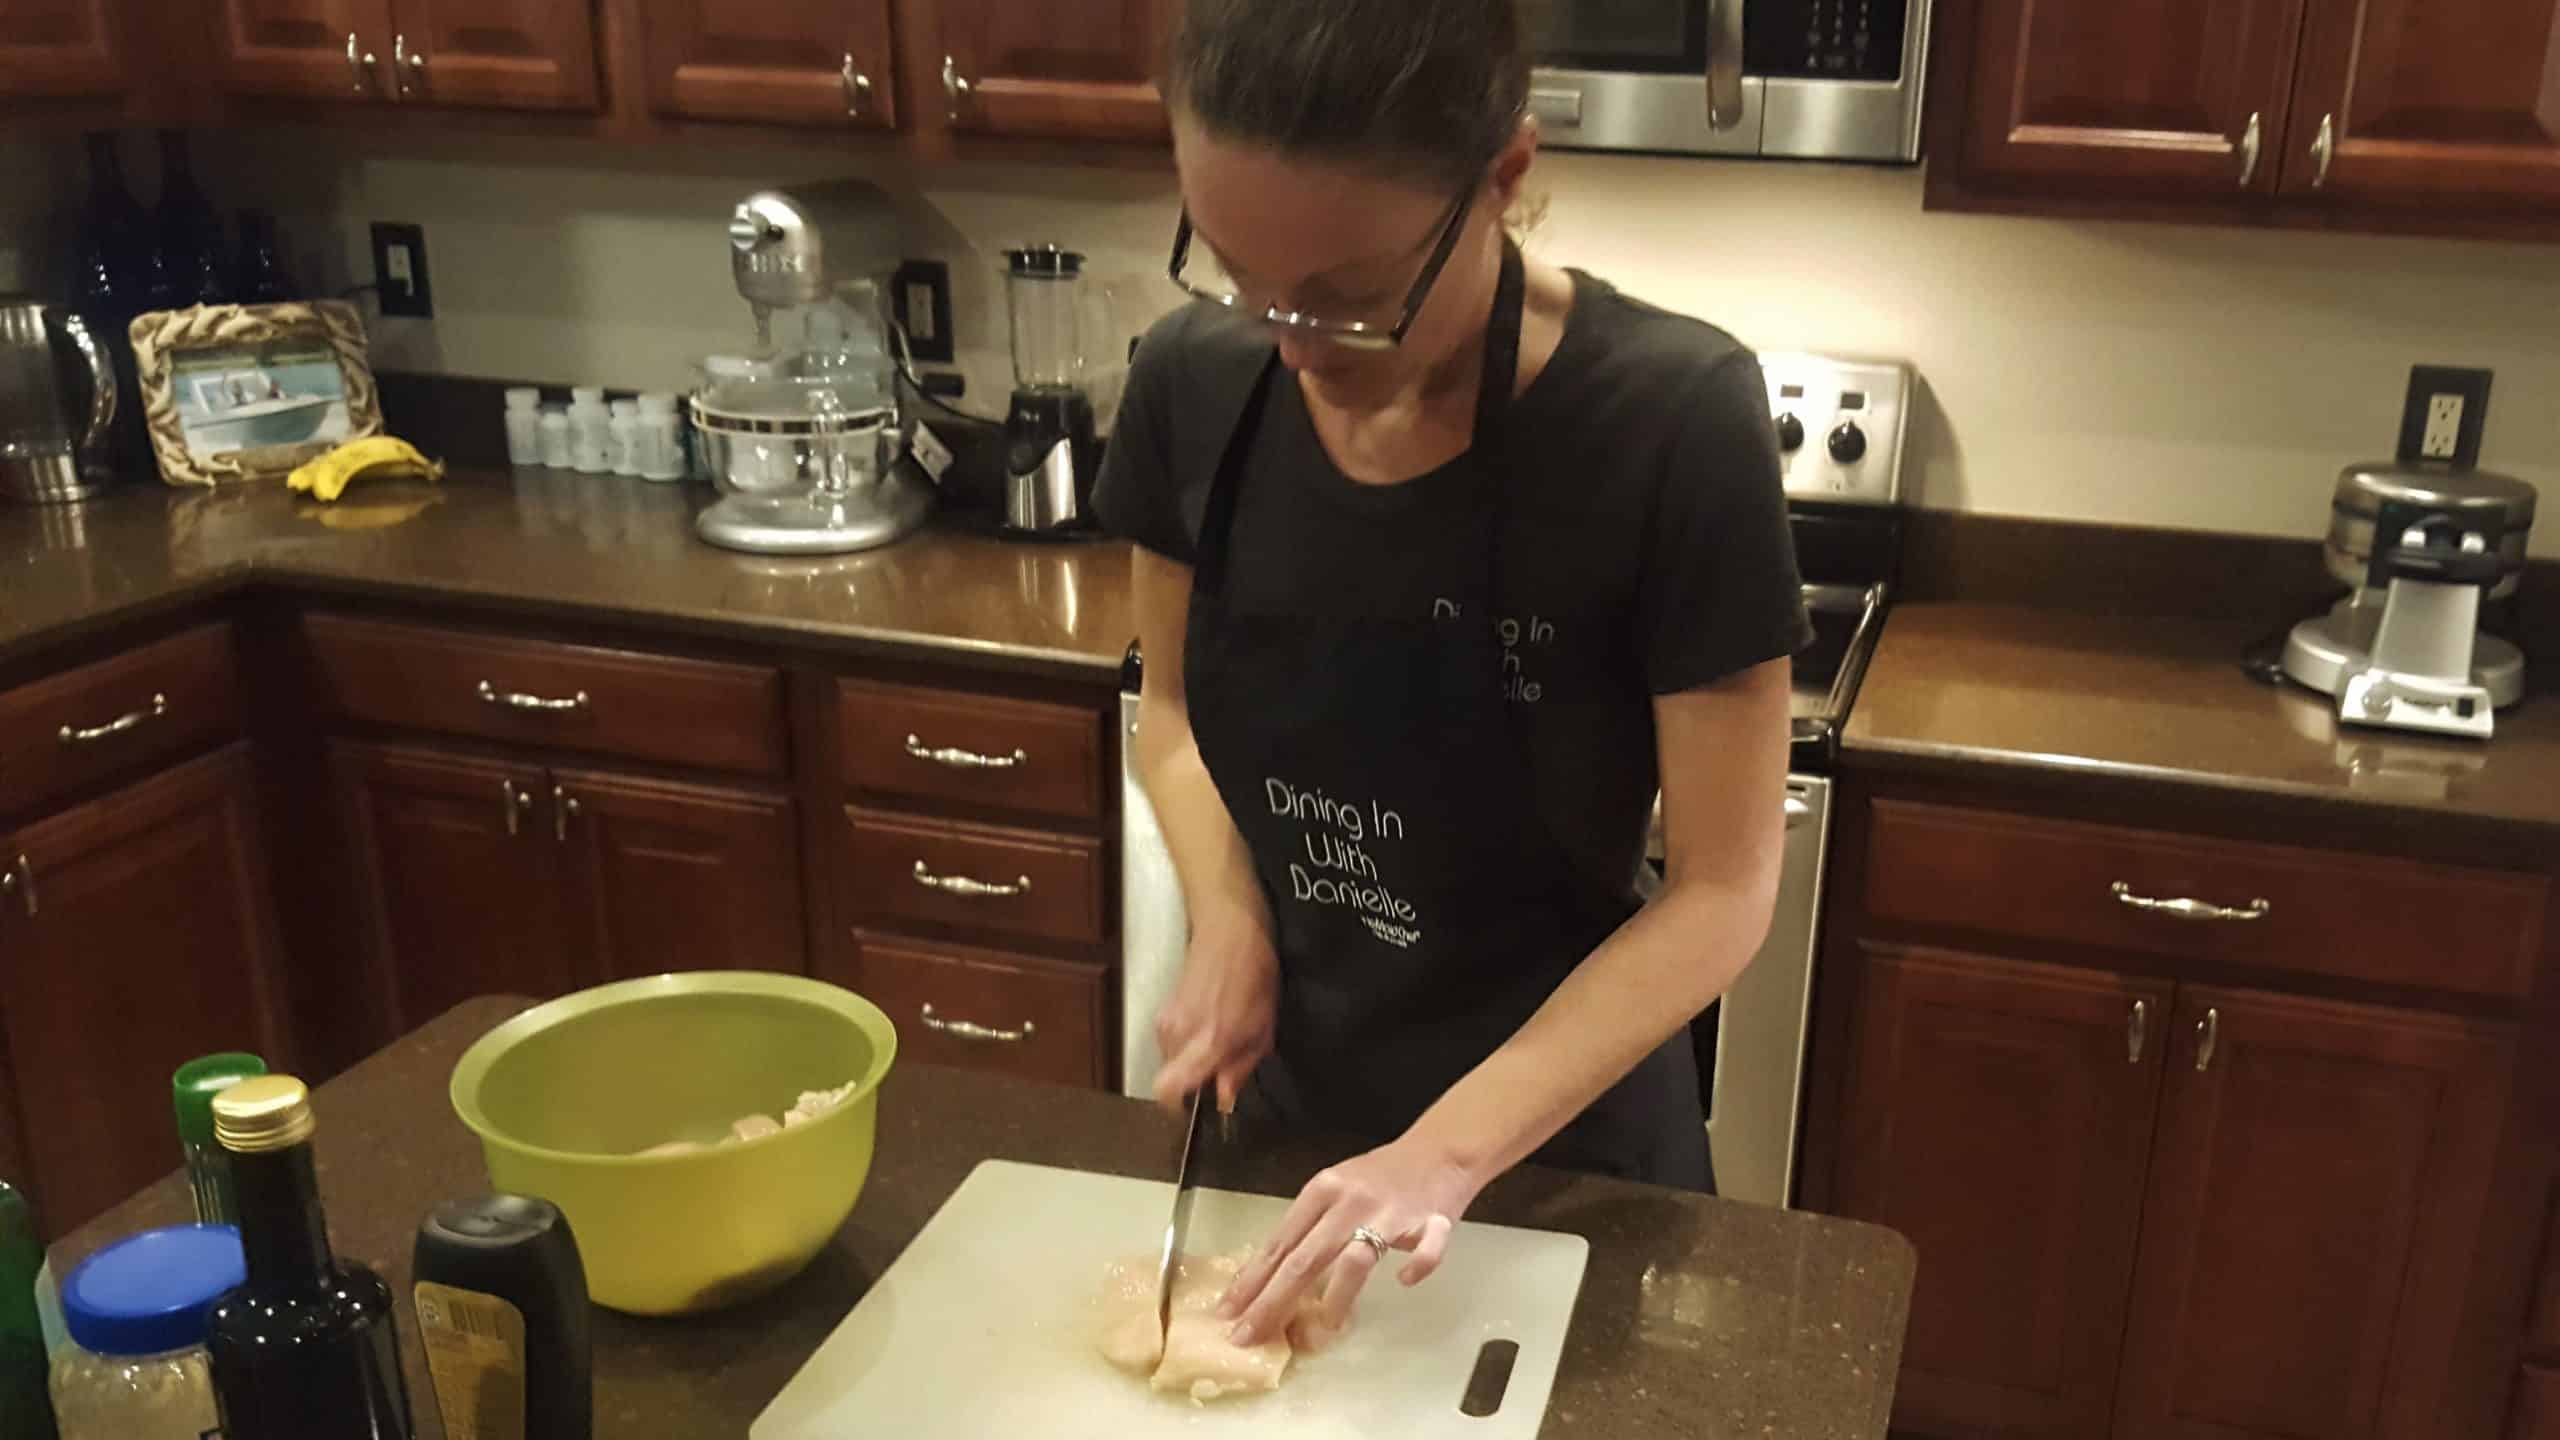 Cutting up Chicken Breast for Chicken Strips - Dining in with Danielle